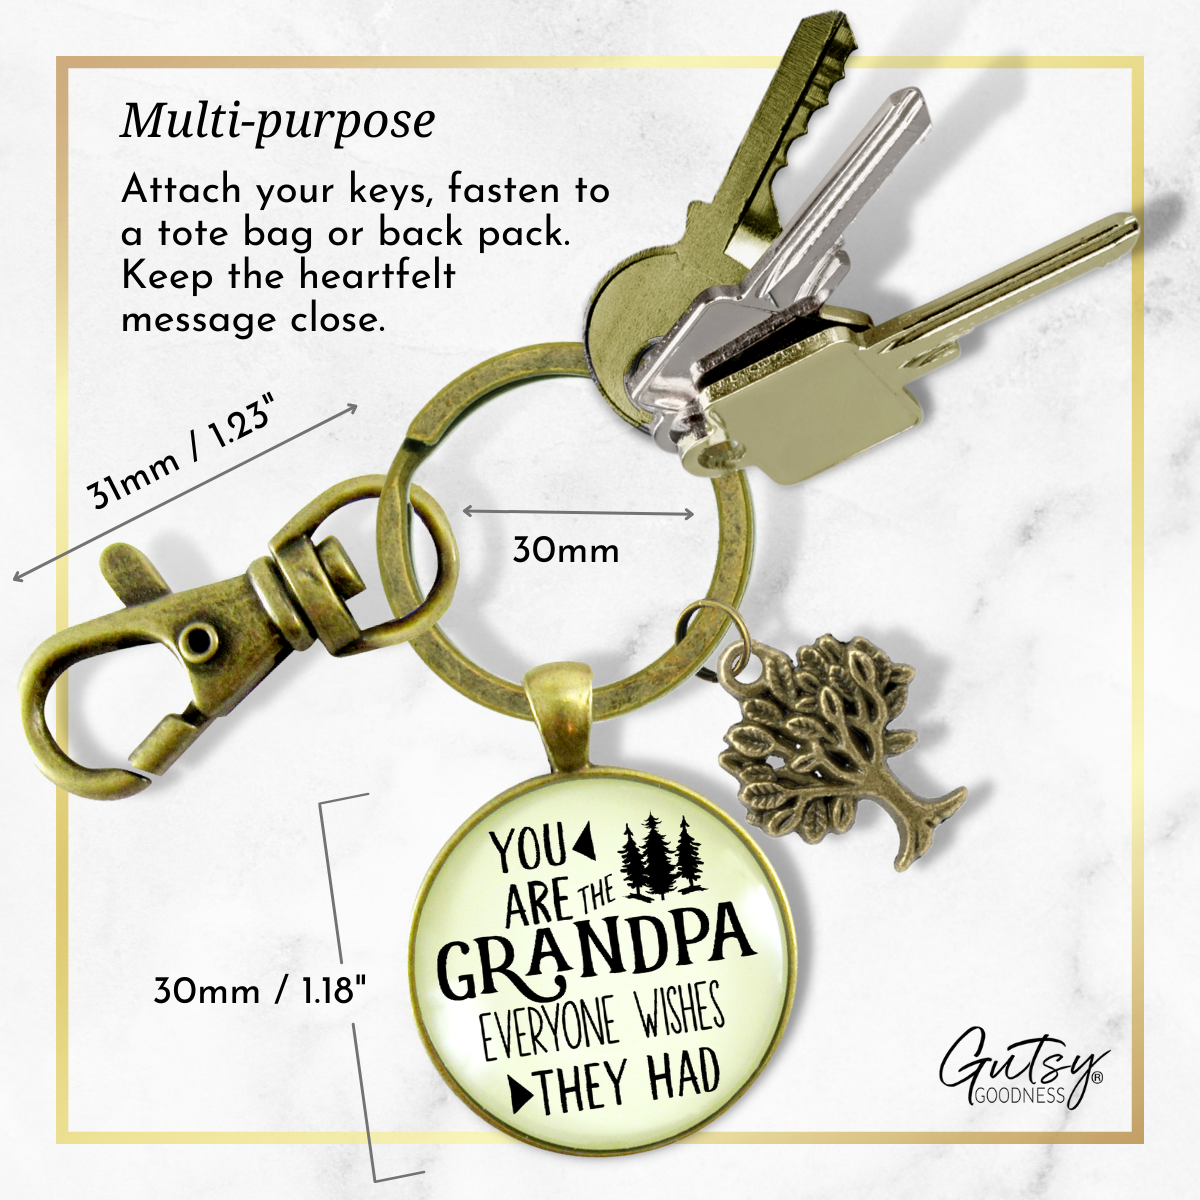 Grandpa Keychain You Are The Grandpa Everyone Wishes For Gift - Gutsy Goodness Handmade Jewelry;Grandpa Keychain You Are The Grandpa Everyone Wishes For Gift - Gutsy Goodness Handmade Jewelry Gifts